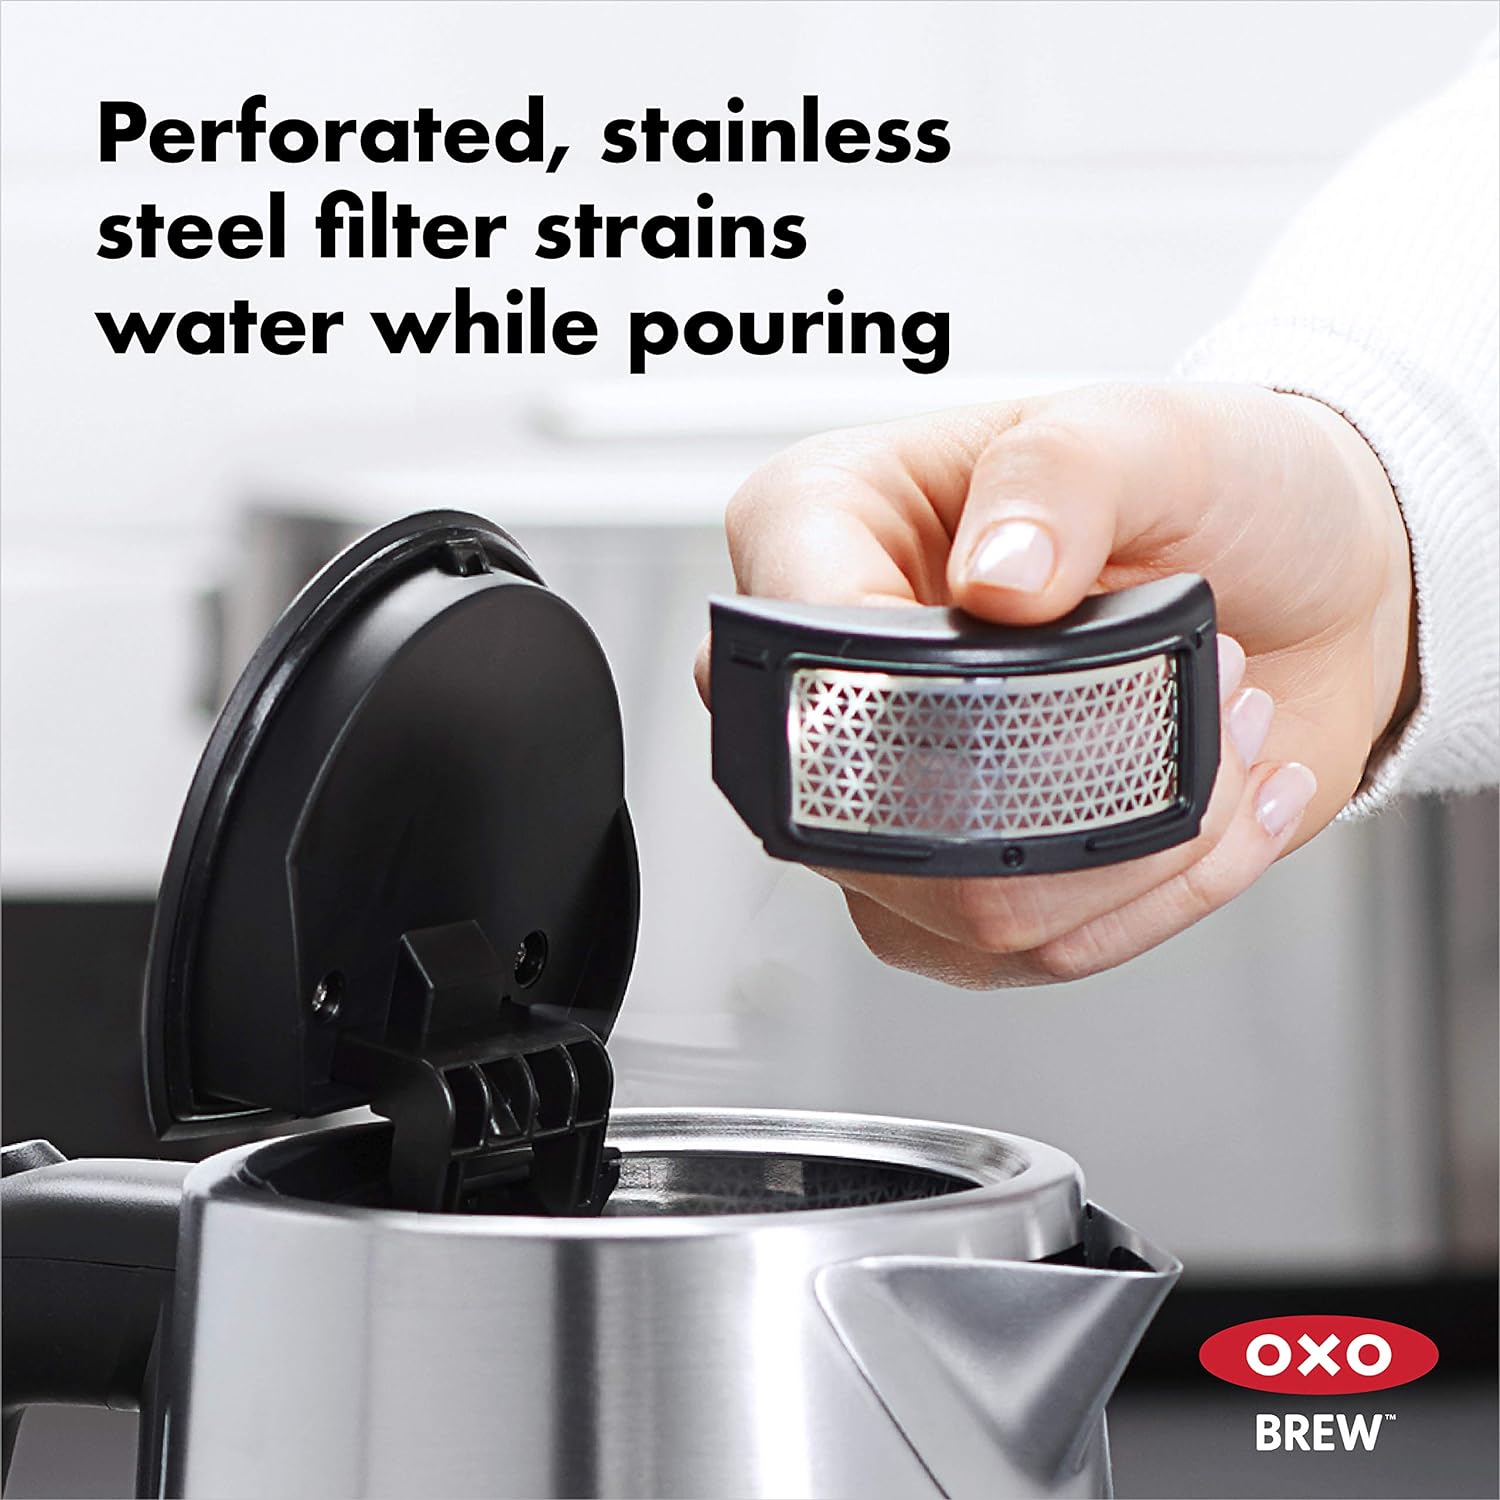 Oxo On Clarity Cordless Glass Electric Kettle, Silver, 1.75 L